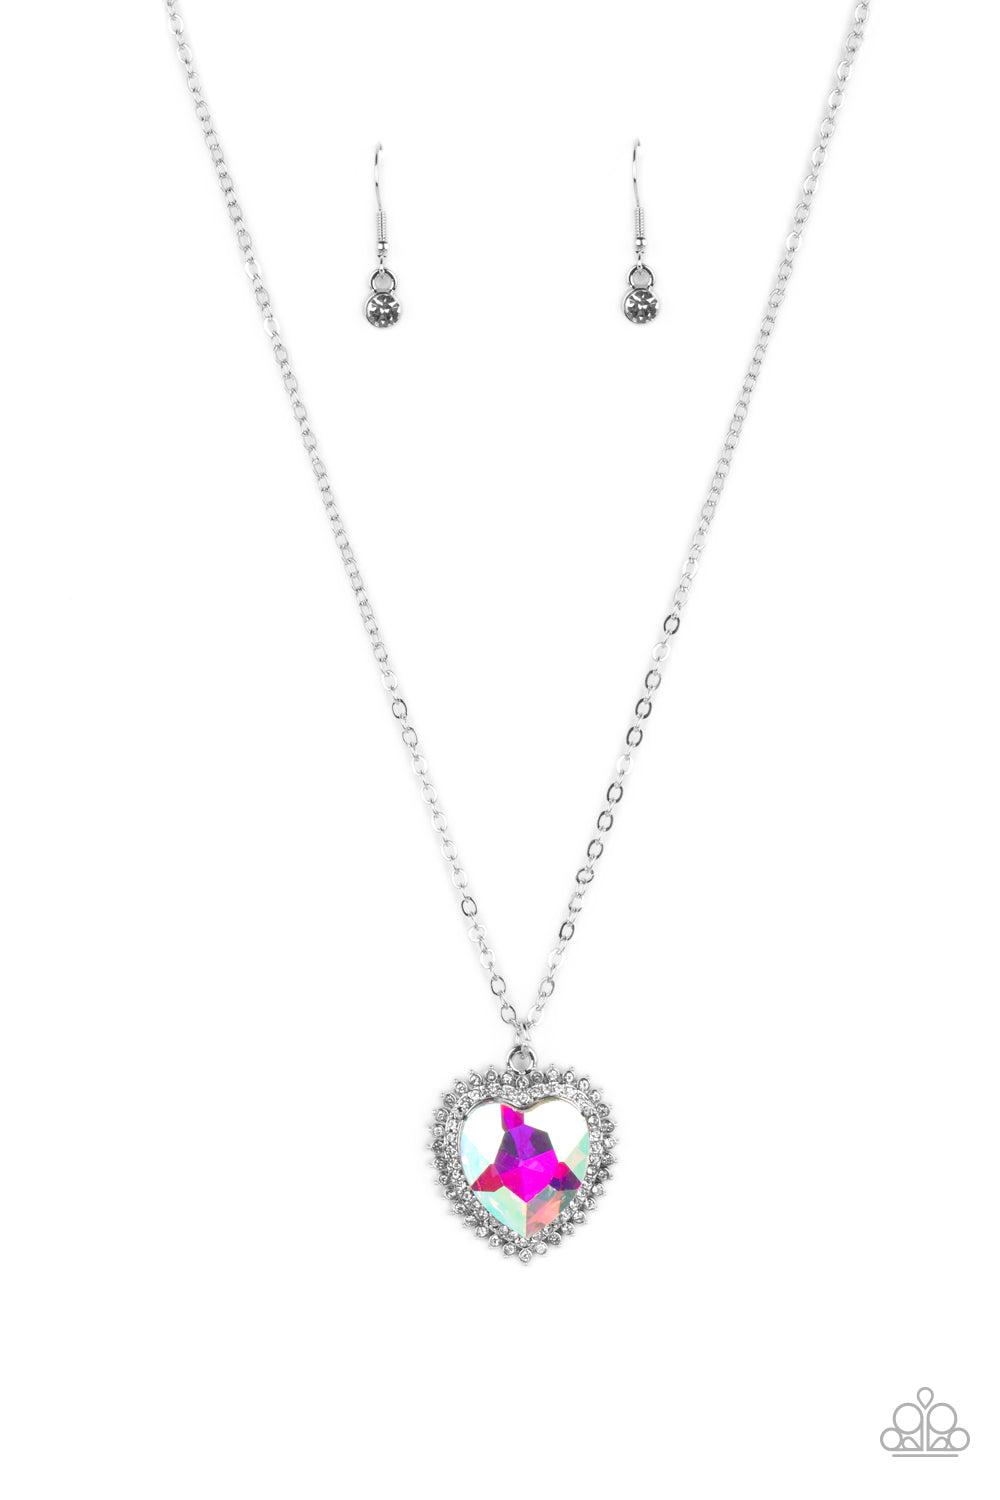 Sweethearts Stroll Multi Iridescent Heart Necklace - Paparazzi Accessories- lightbox - CarasShop.com - $5 Jewelry by Cara Jewels